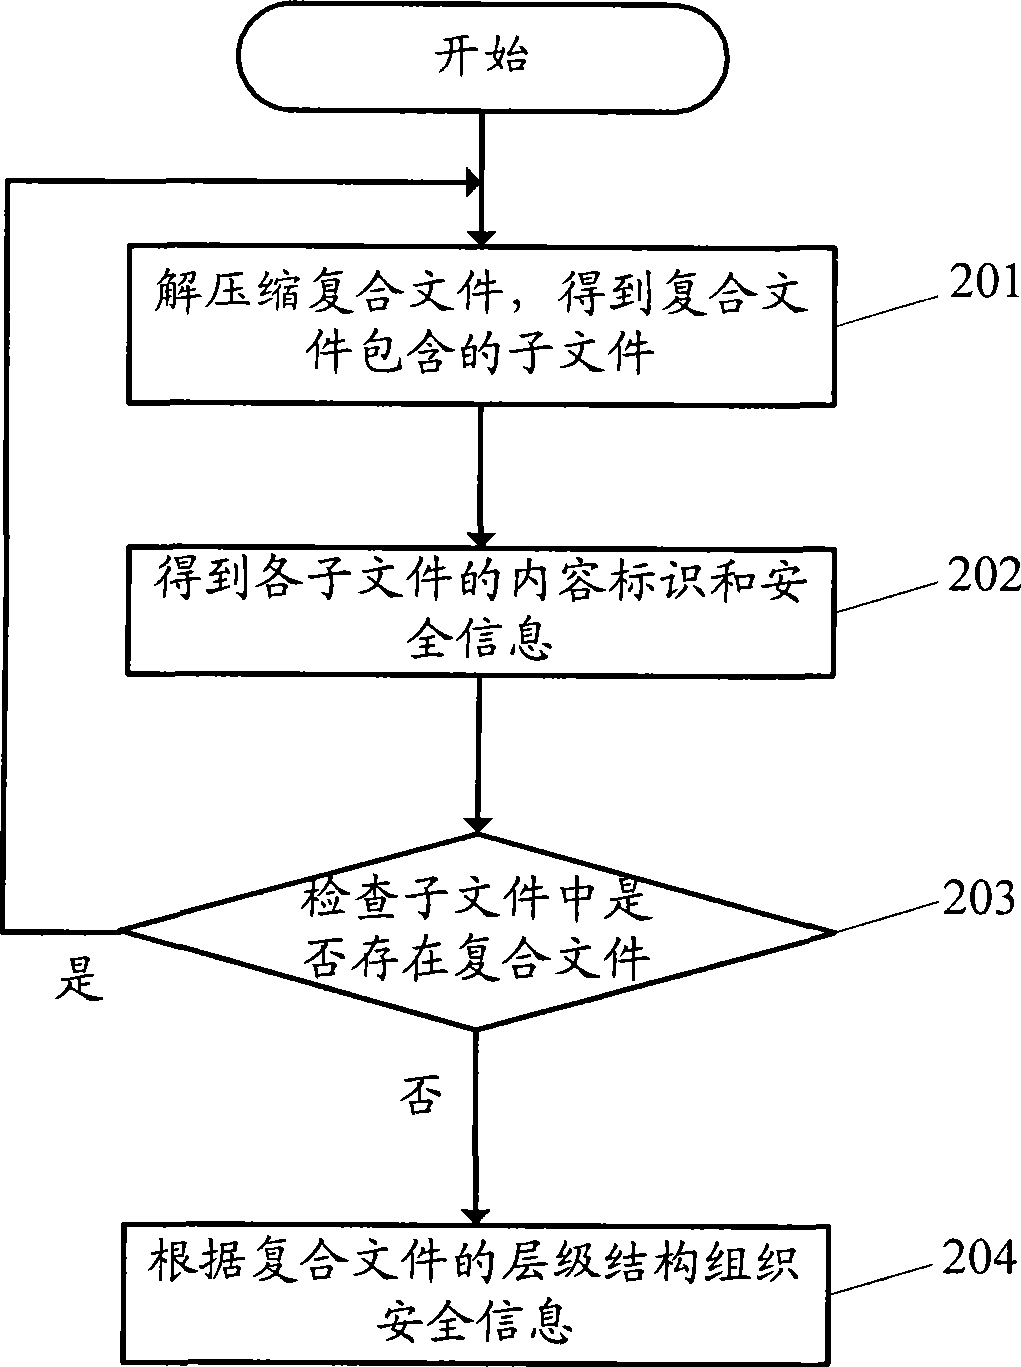 Method for providing file security information and security information processing system